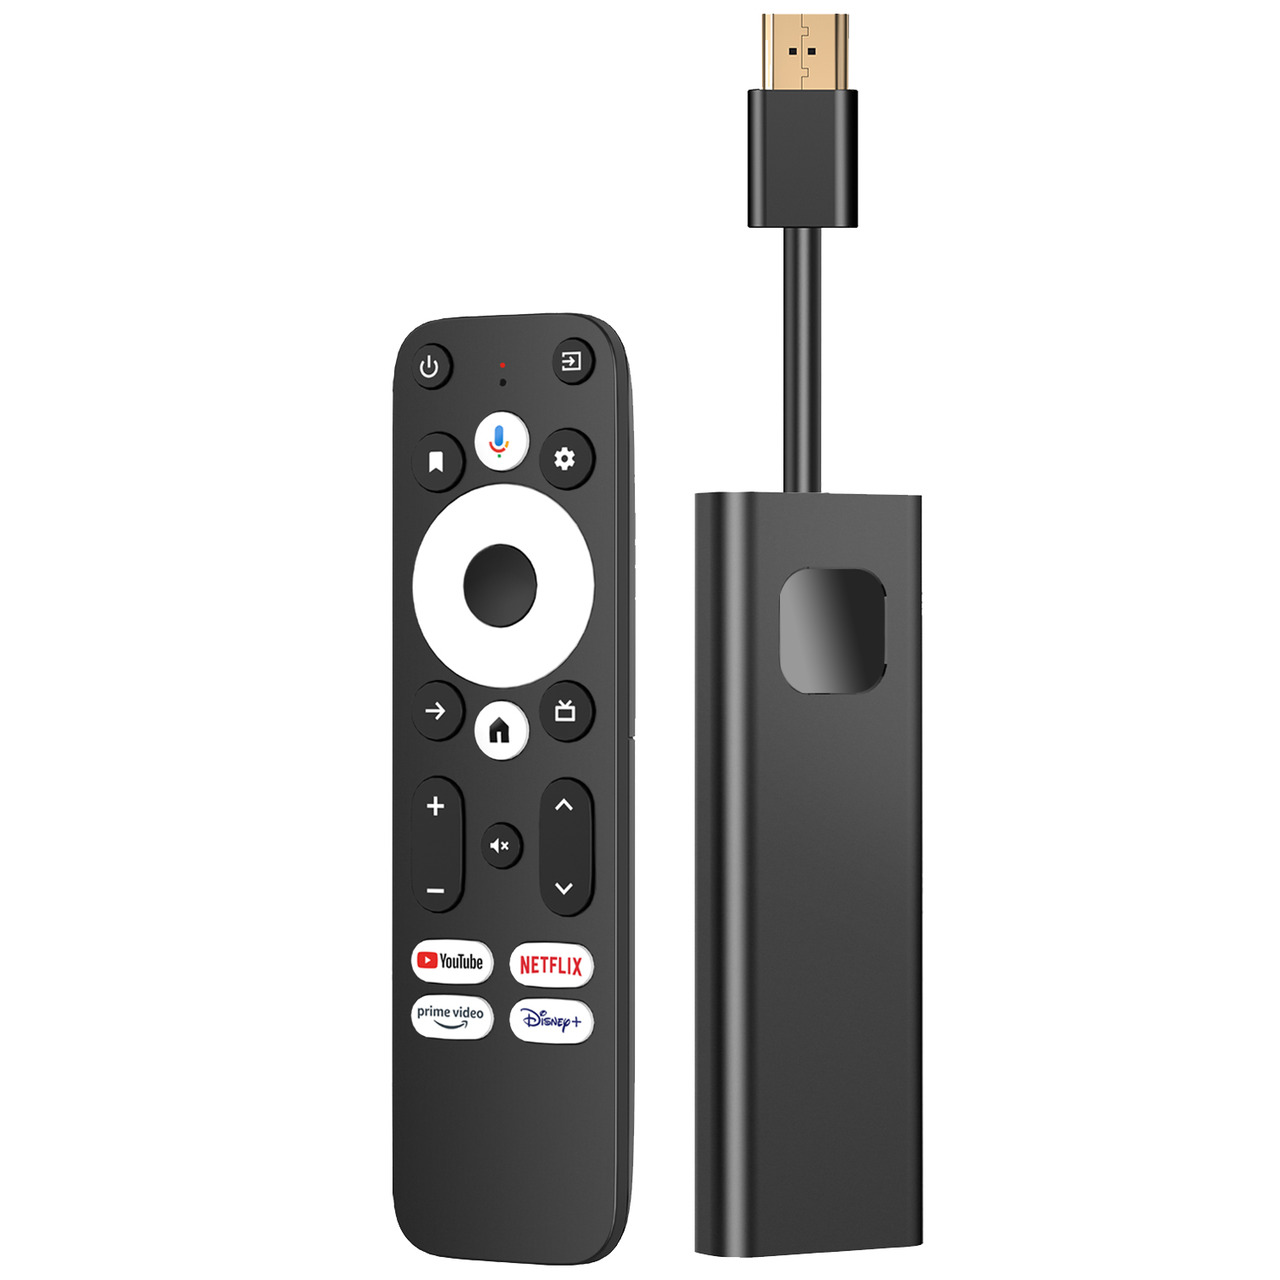 Orbsmart Android-TV-Stick Dcolor GD1- Android 11- 4K-Streaming- HDR- Sprachsteuerung unter PC-Hardware